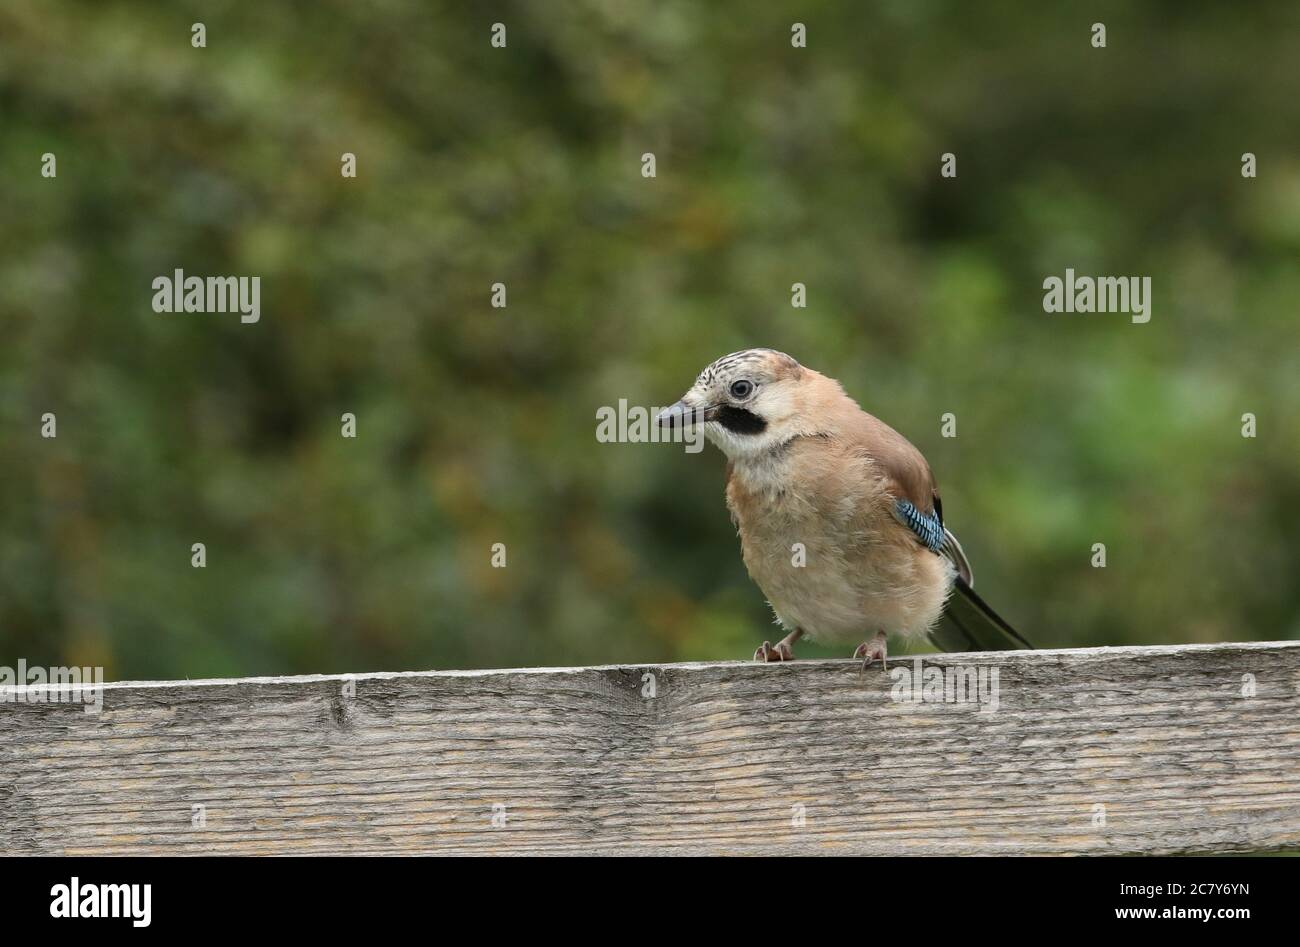 A cute fledgling Jay, Garrulus glandarius, perching on a wooden fence at the edge of woodland. Stock Photo